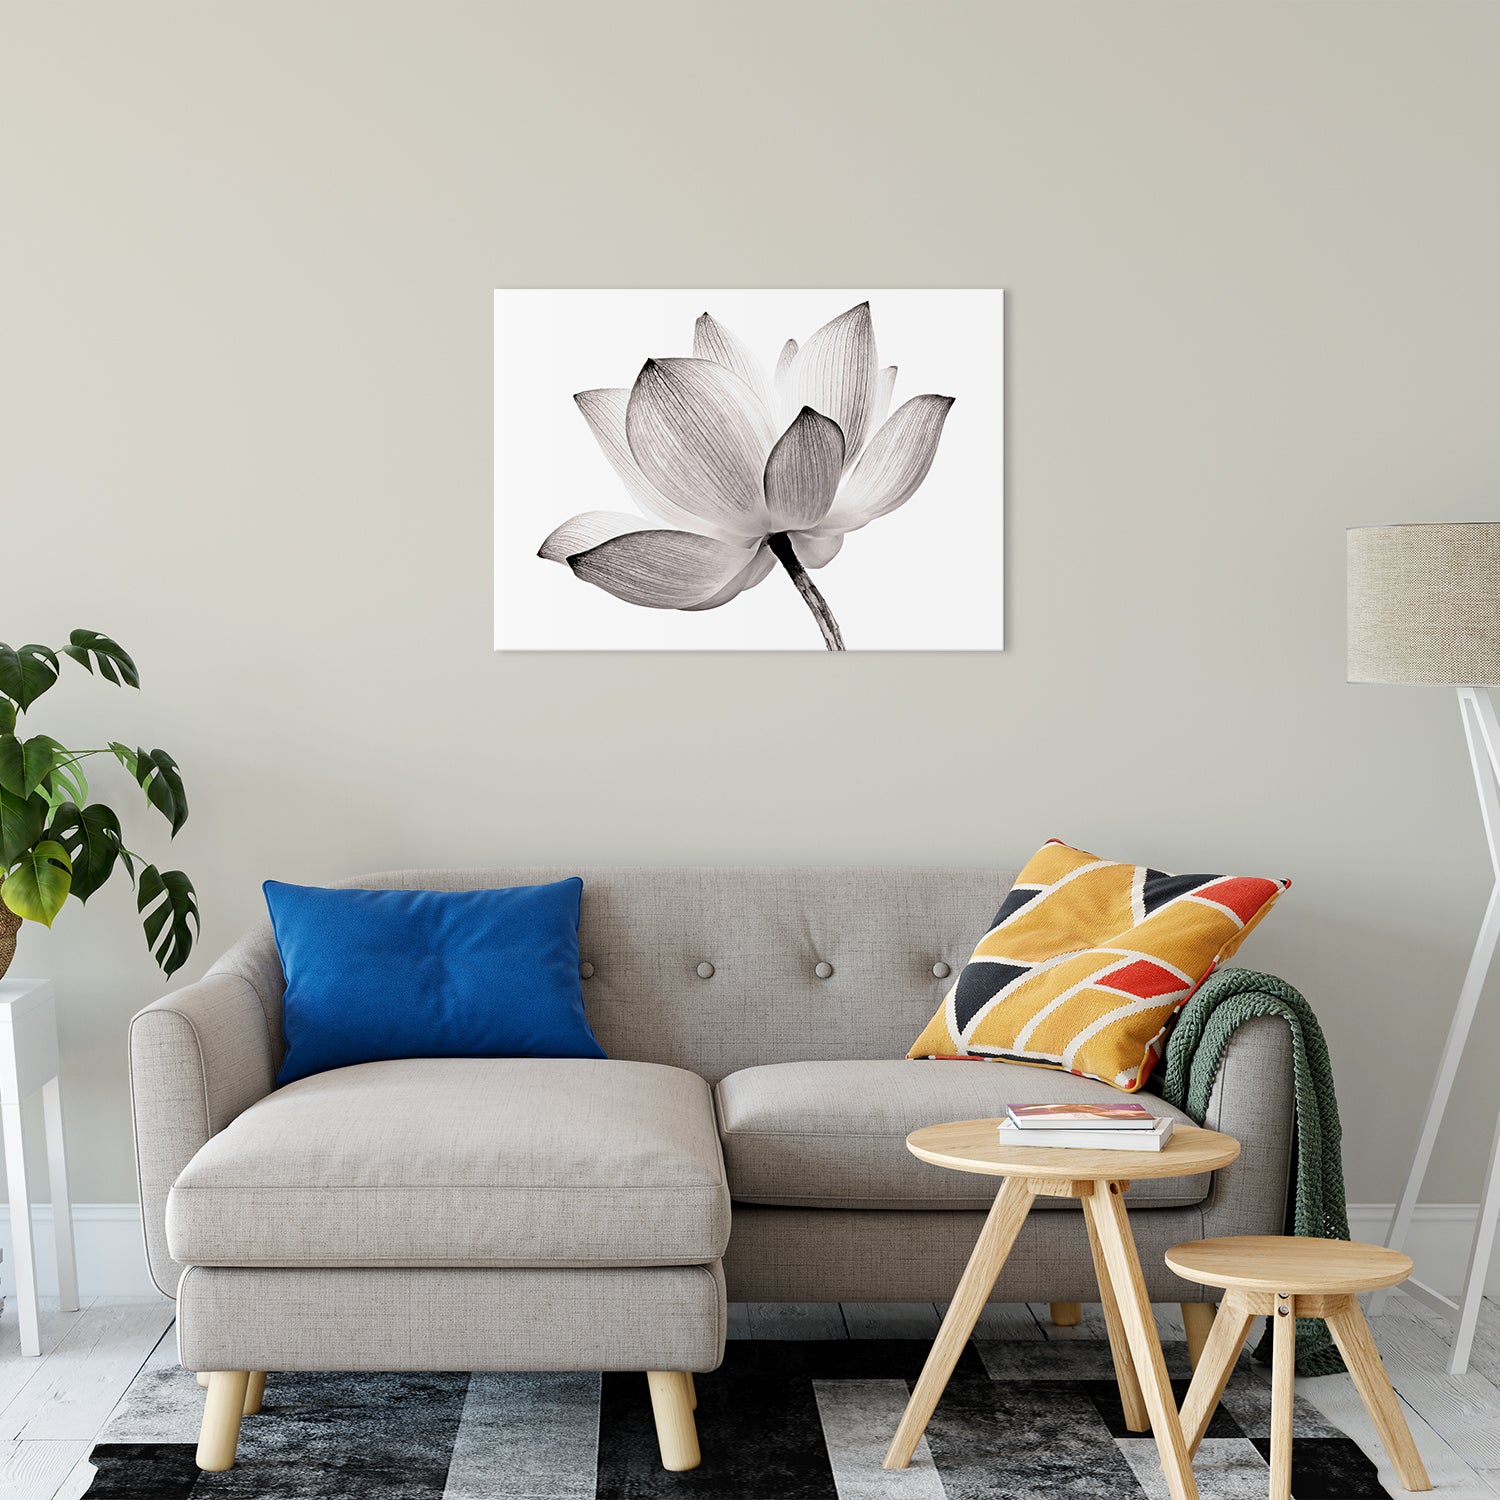 Lotus Flower Tinted Effect Floral Nature Photo Fine Art Canvas Print 24" x 36" - PIPAFINEART